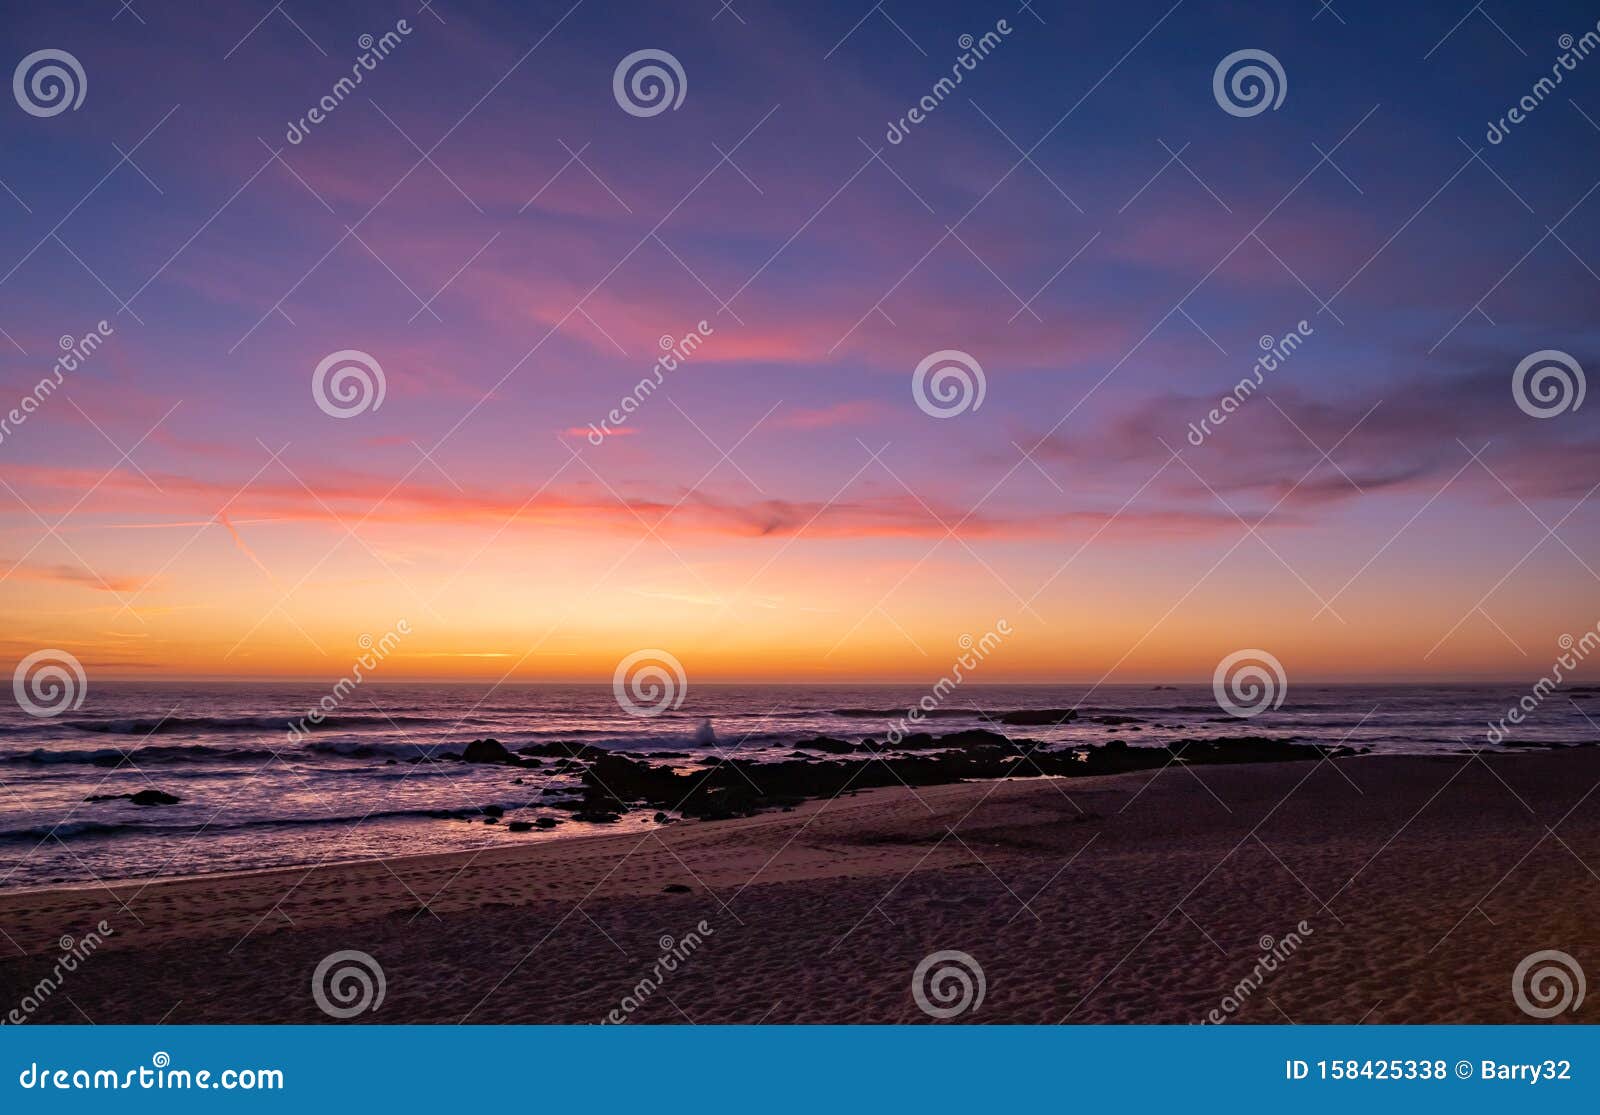 beautiful dusk over beach in summer with vivid blue orange gradient sky and reflections